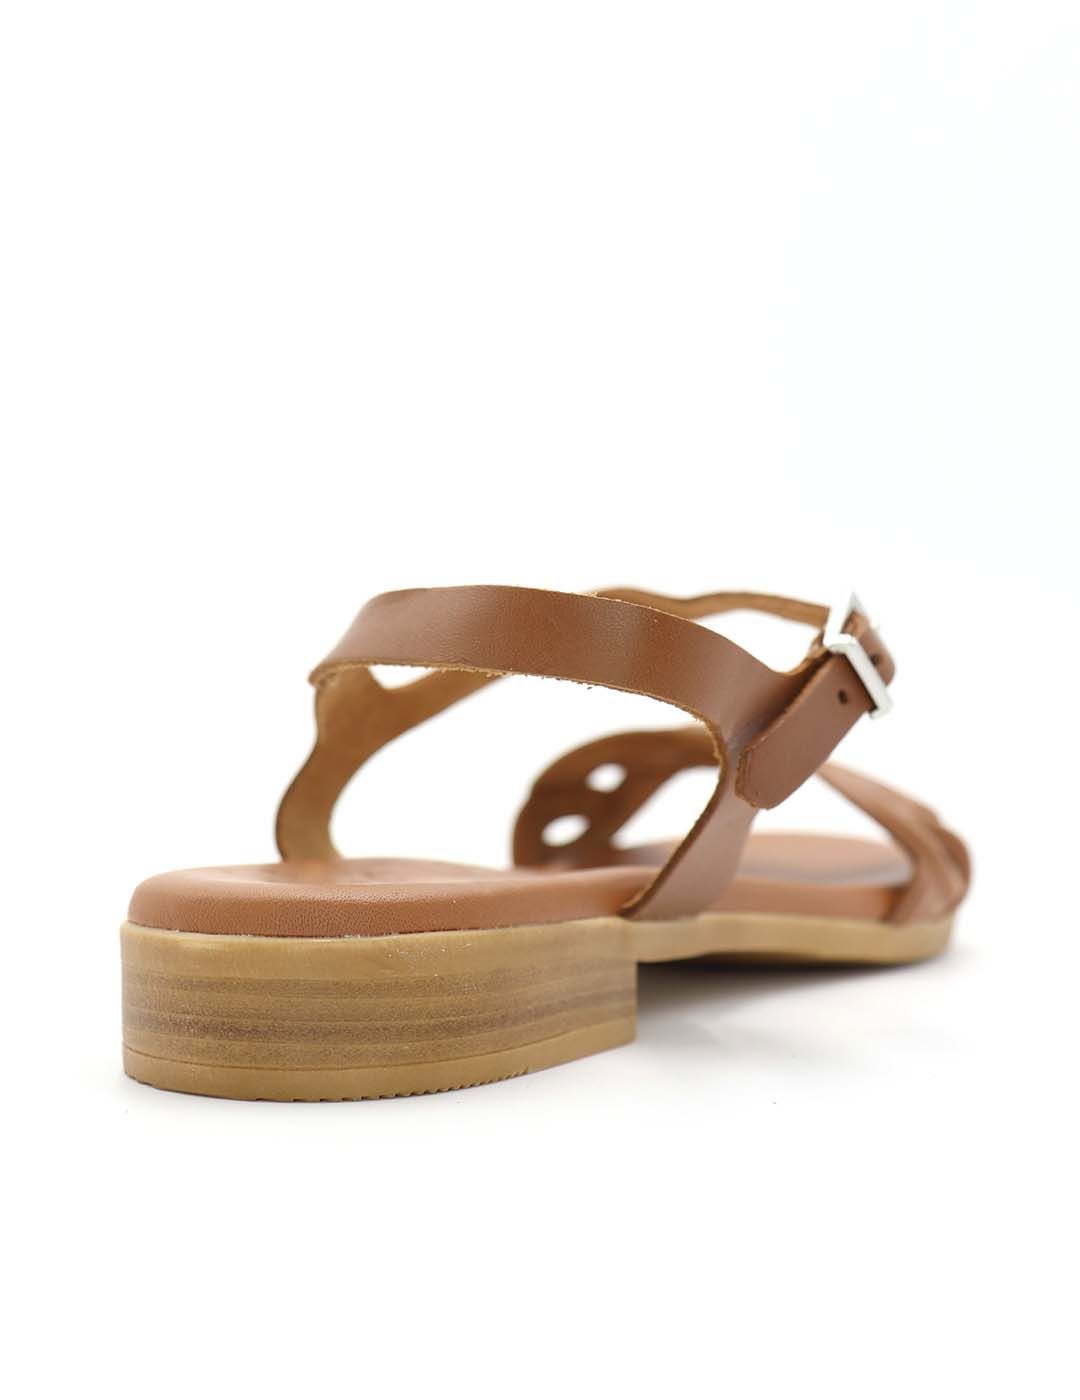 Sandals 4964 Roble